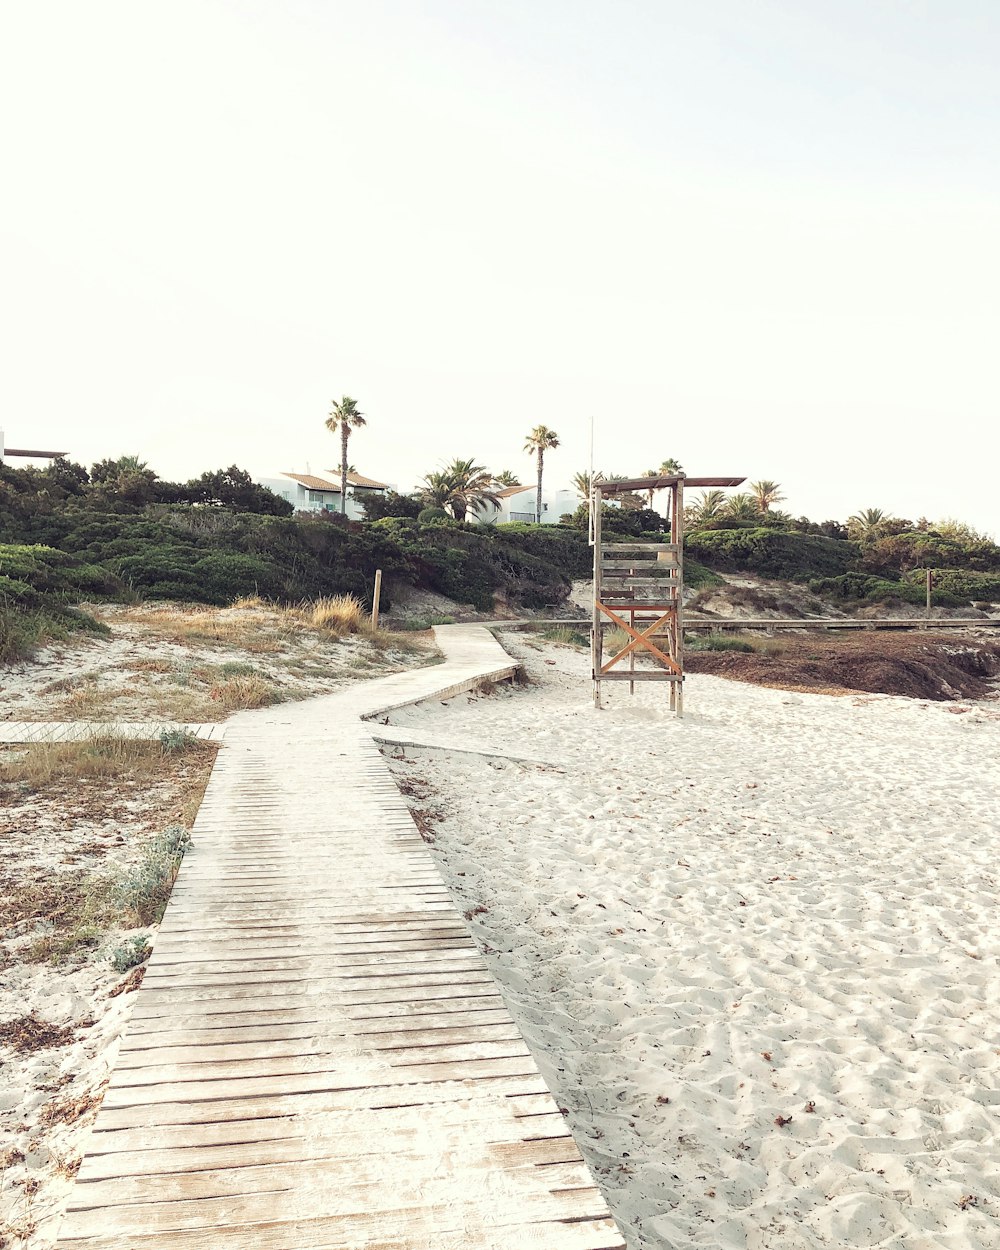 a wooden path leading to a beach with palm trees